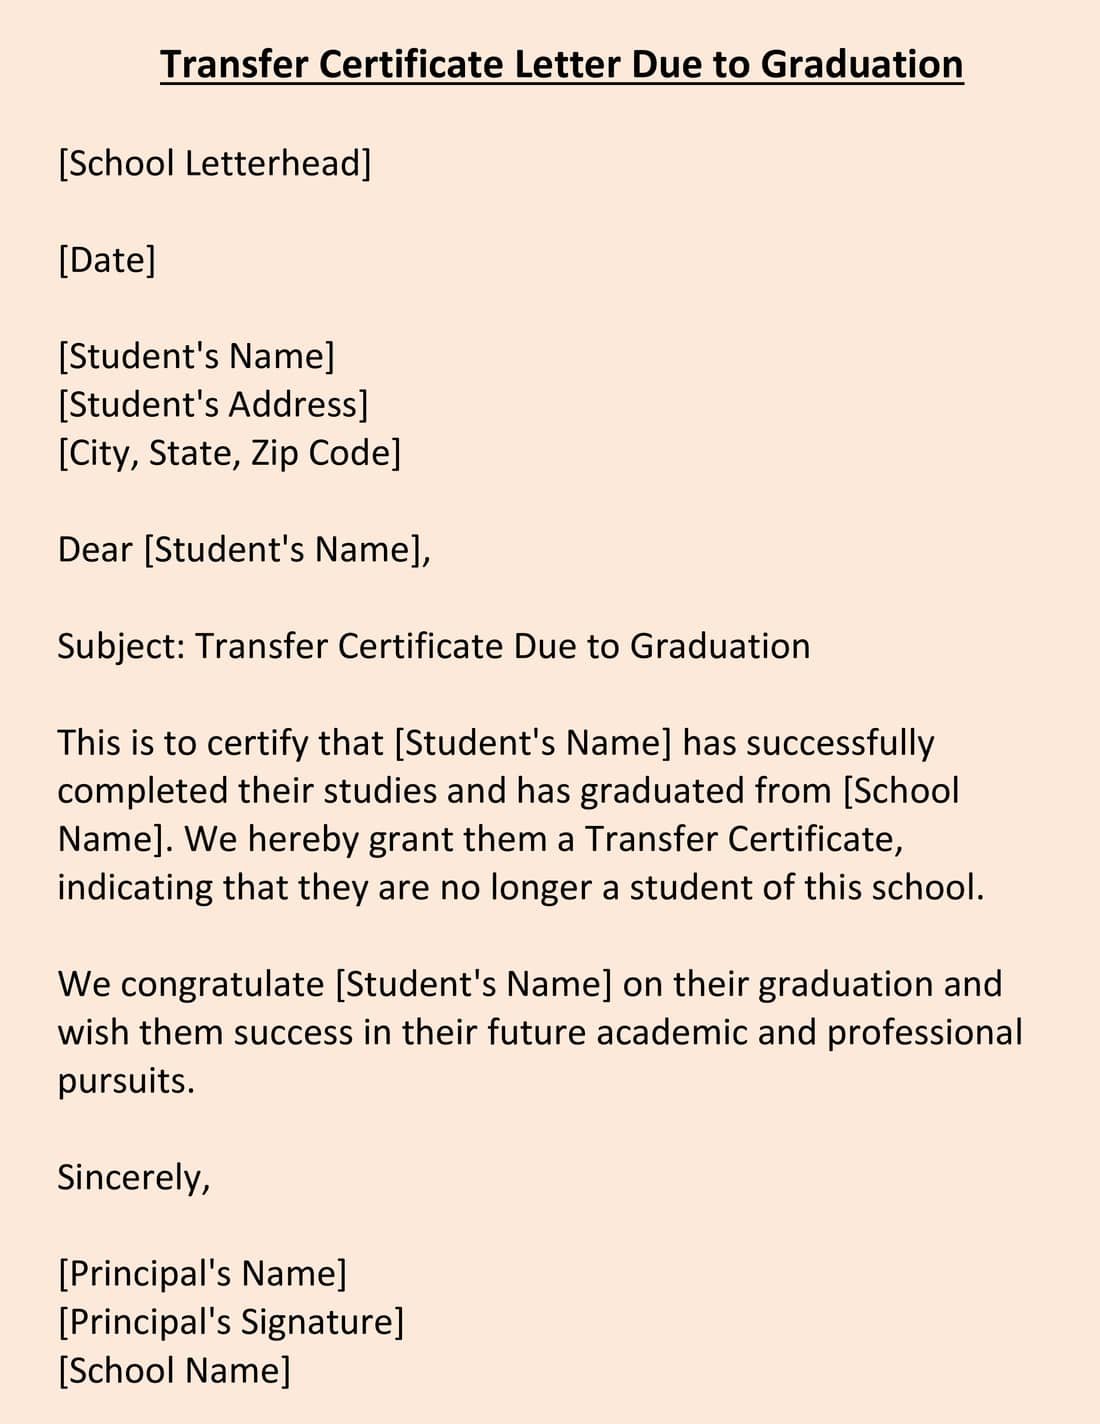 Transfer Certificate Letter Due to Graduation